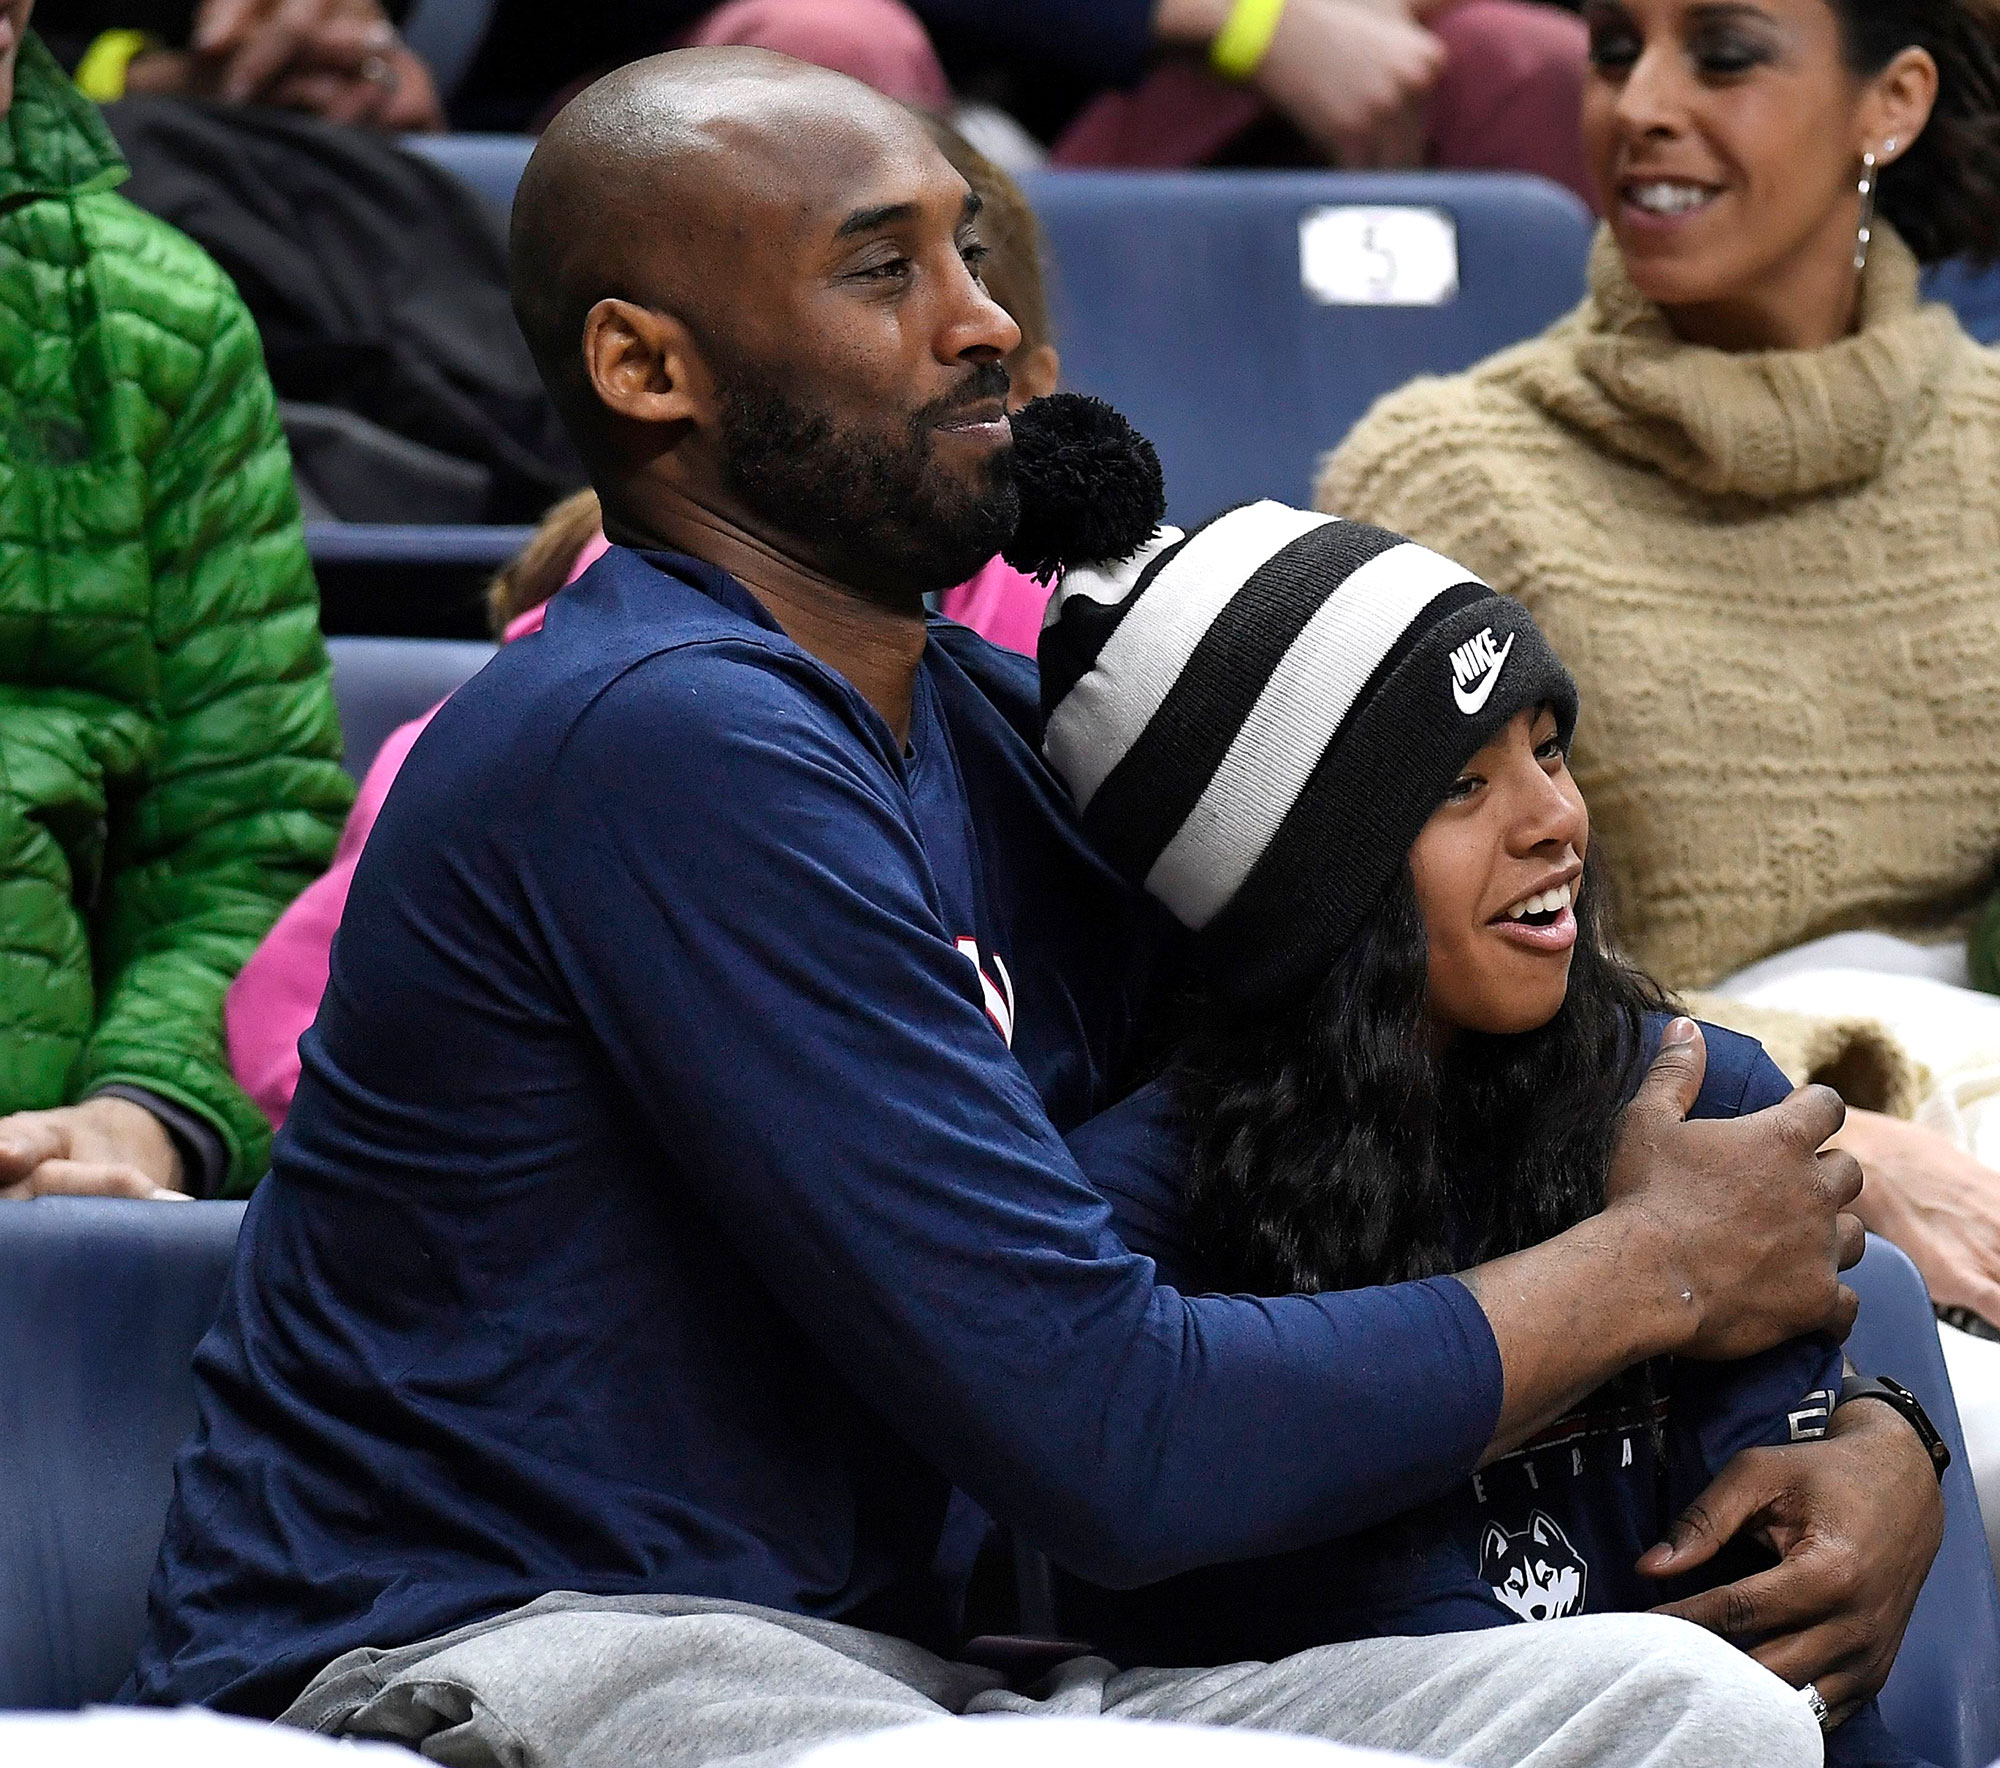 Kobe Bryant Credits Daughter with Getting Him to Watch NBA Again